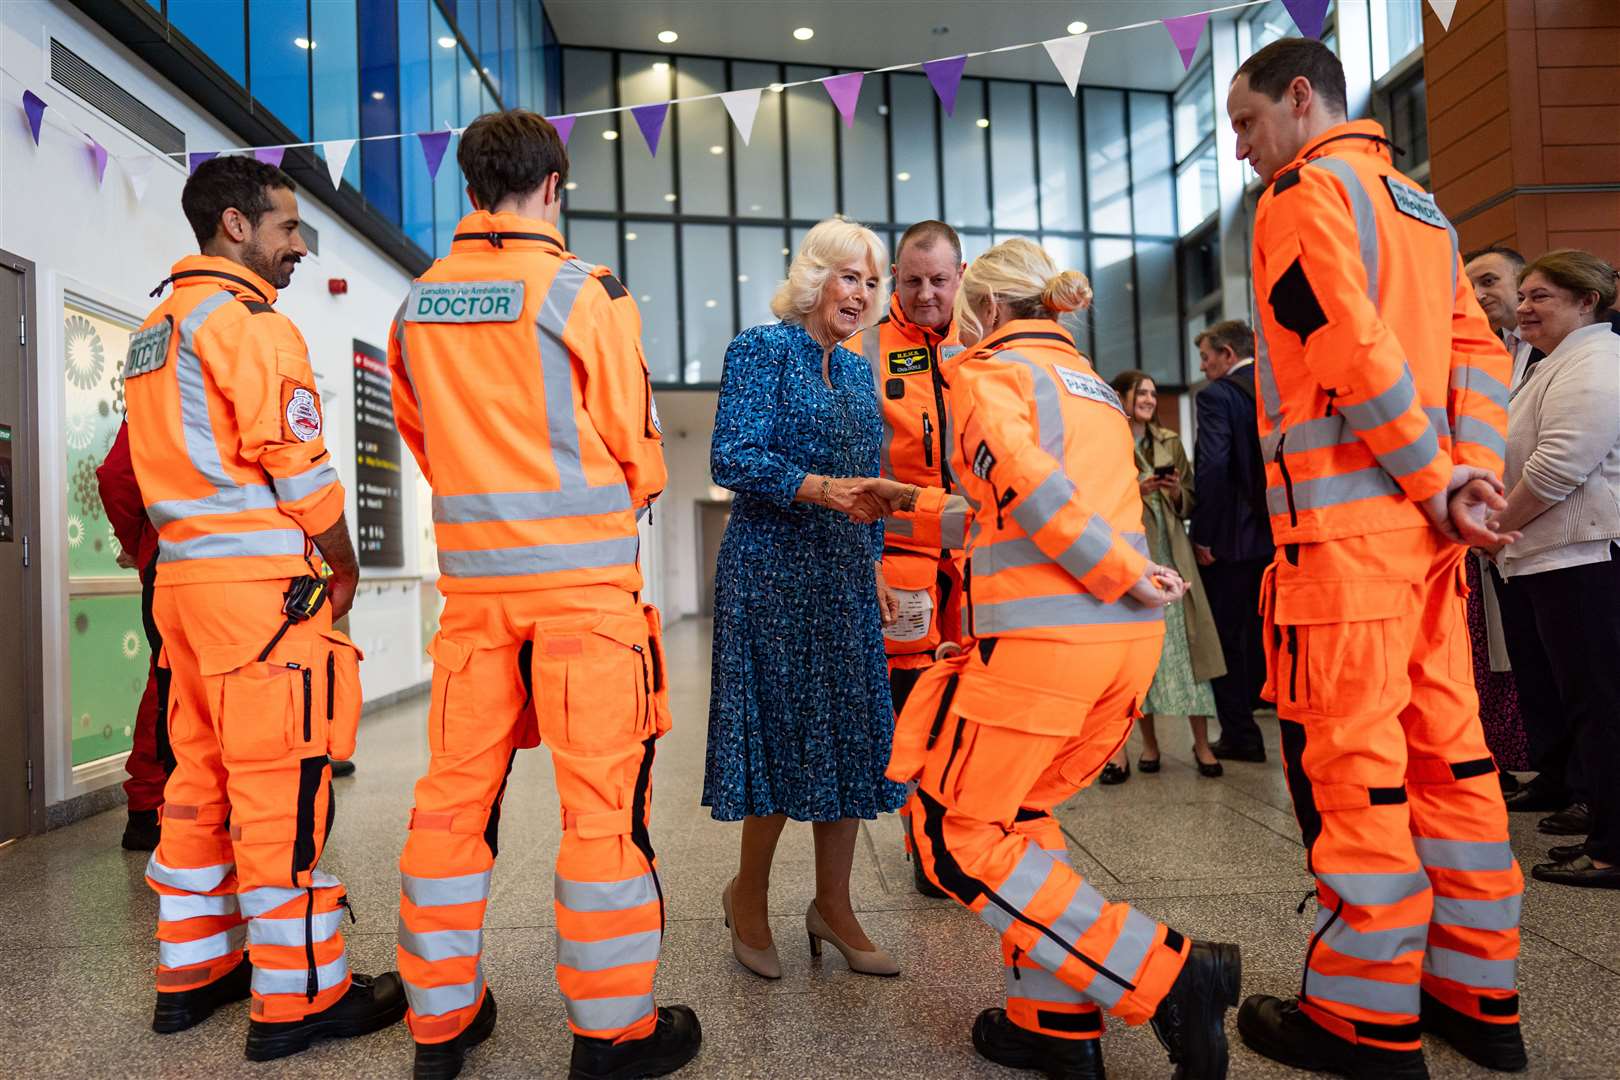 The Queen meets members of the air ambulance service during a visit to the Royal London Hospital (Aaron Chown/PA)